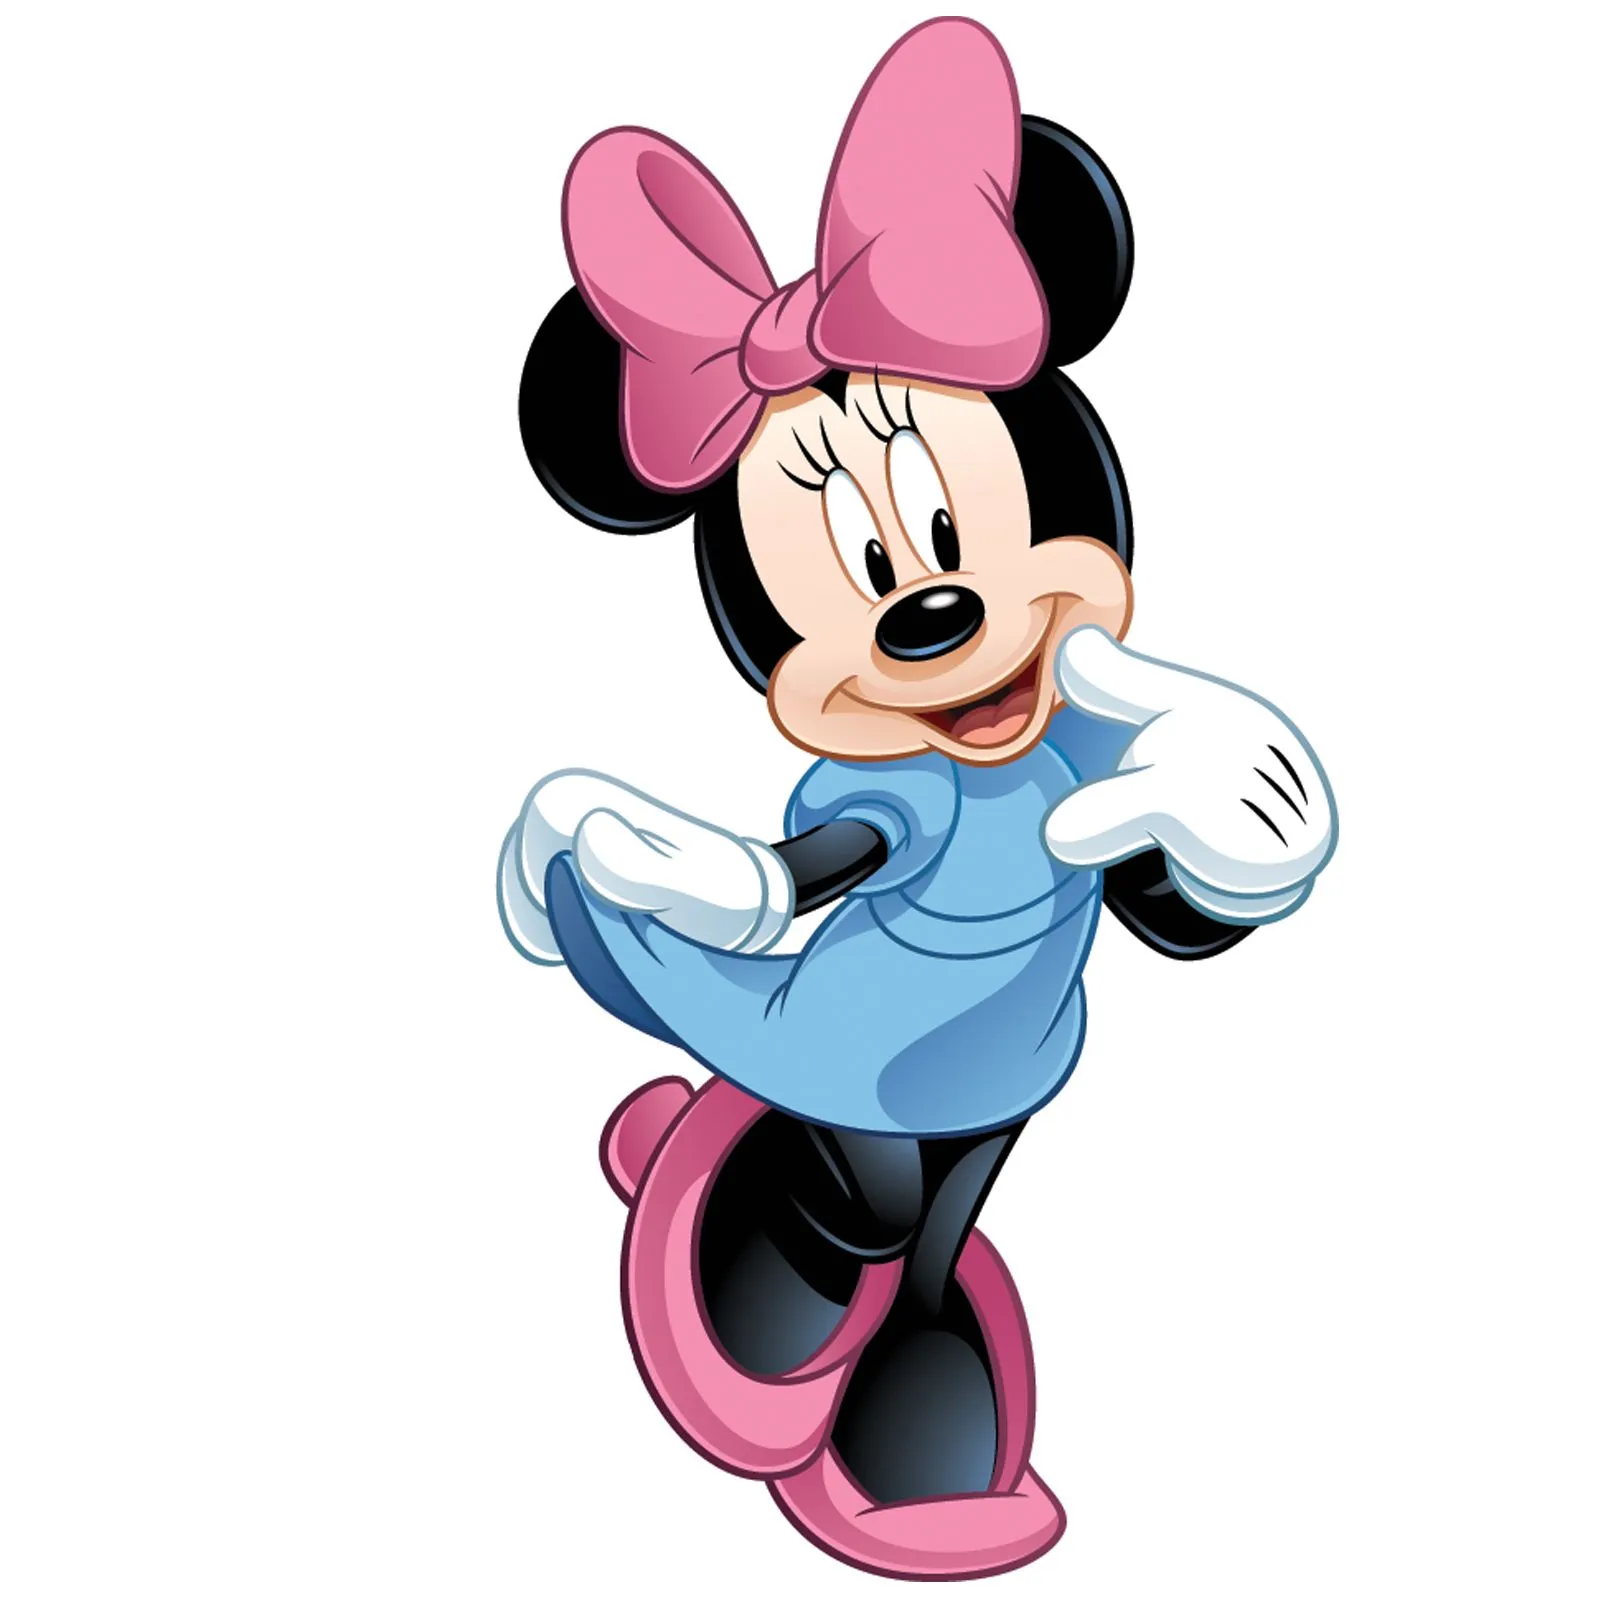 Minnie Mouse Disney Cartoon Character Picture